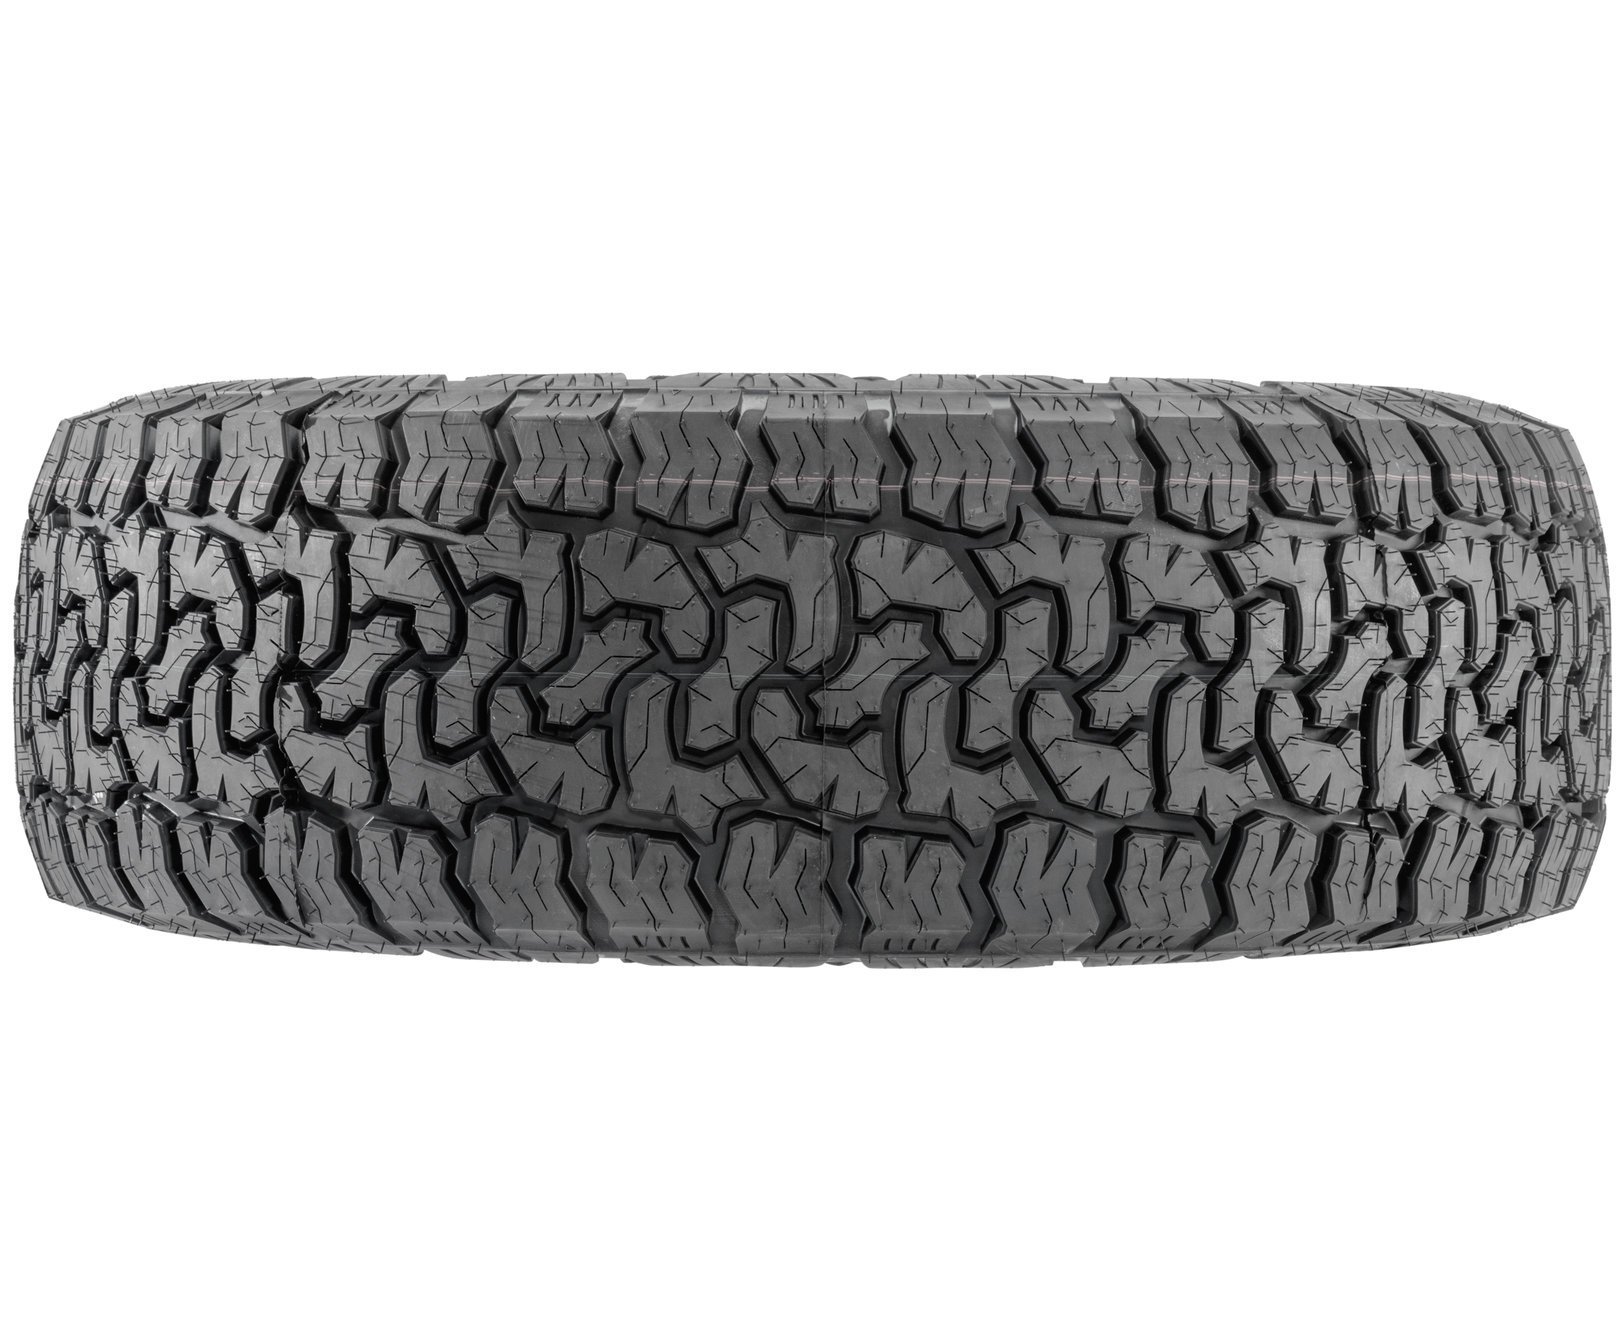 amp tires terrain pro a and t tire